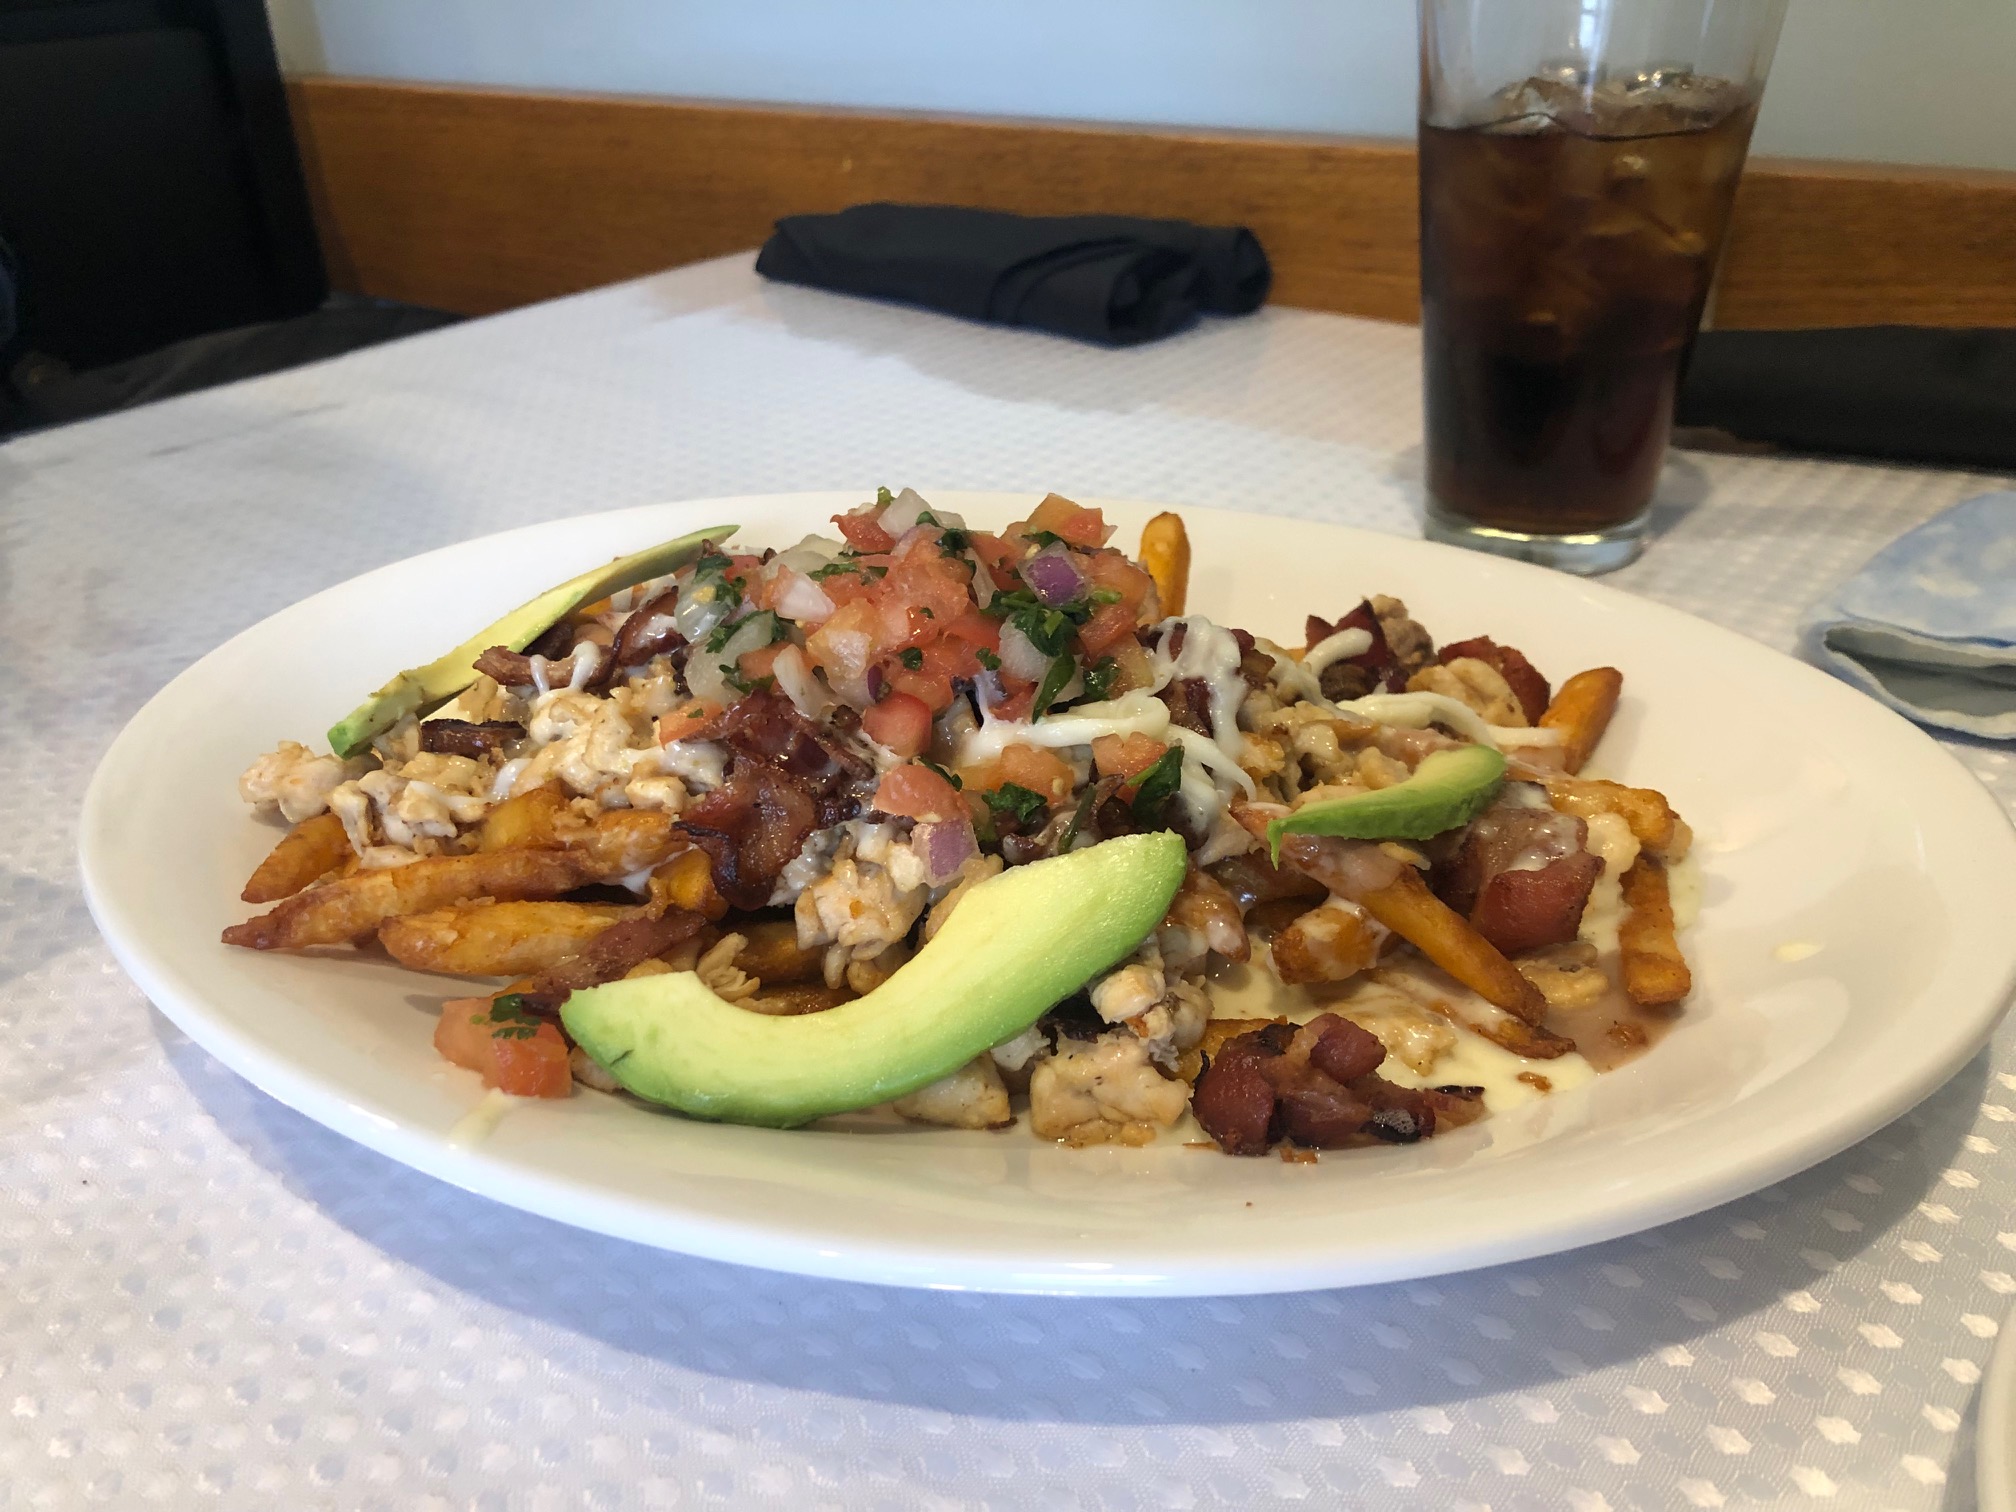 On a white plate, there is a bed of fries with cheese and sliced avocado. Photo by Alyssa Buckley.